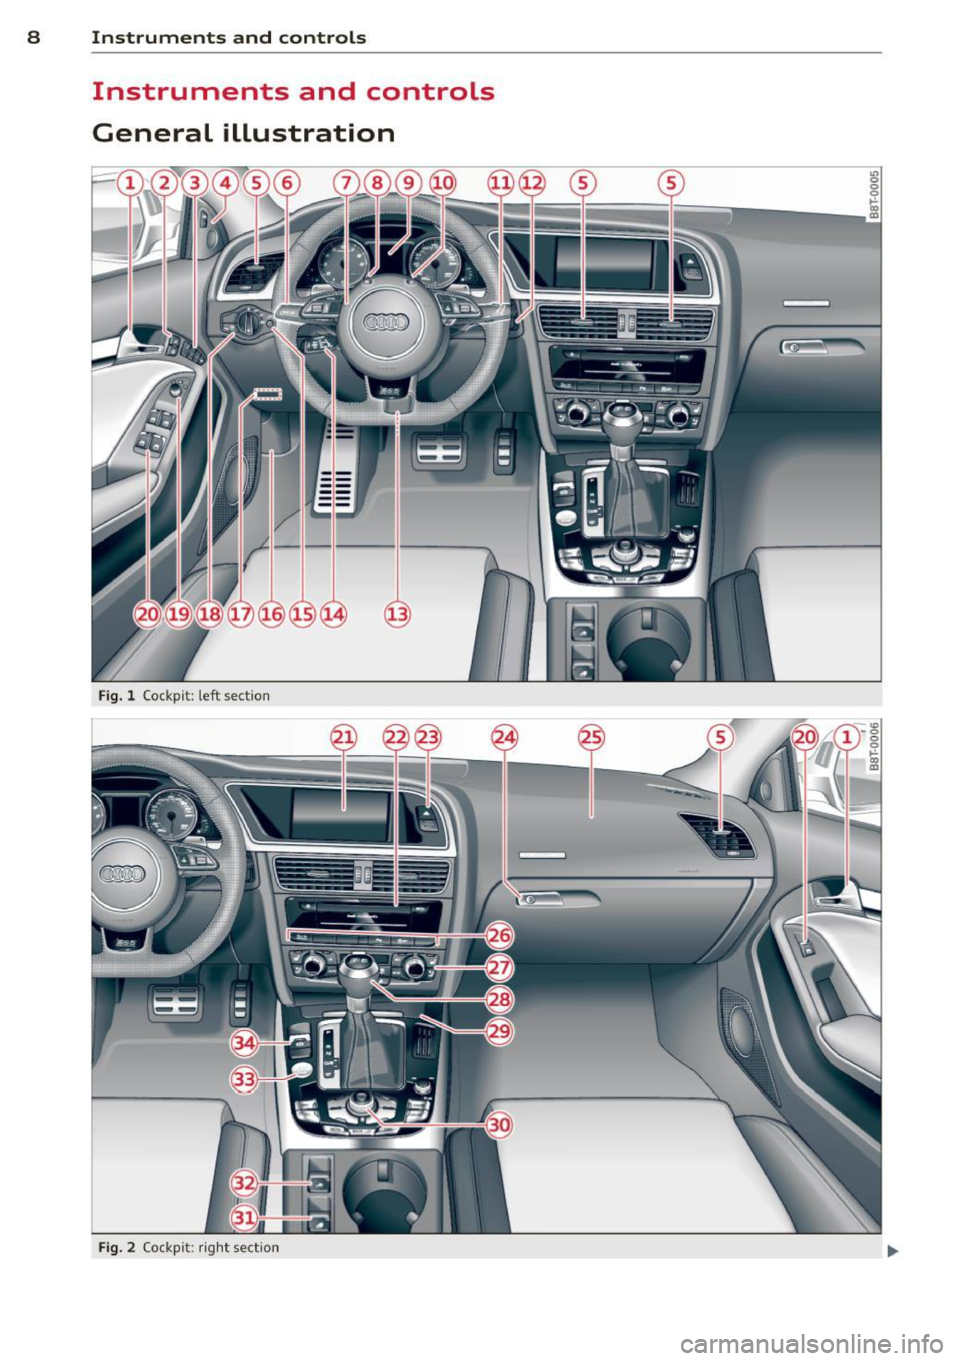 AUDI RS5 CABRIOLET 2015  Owners Manual 8  Instruments and controls 
Instruments  and  controls 
General  illustration 
Fig. l Cockp it:  left  sect io n 
Fig. 2 Co ck pi t: ri ght  sect io n  